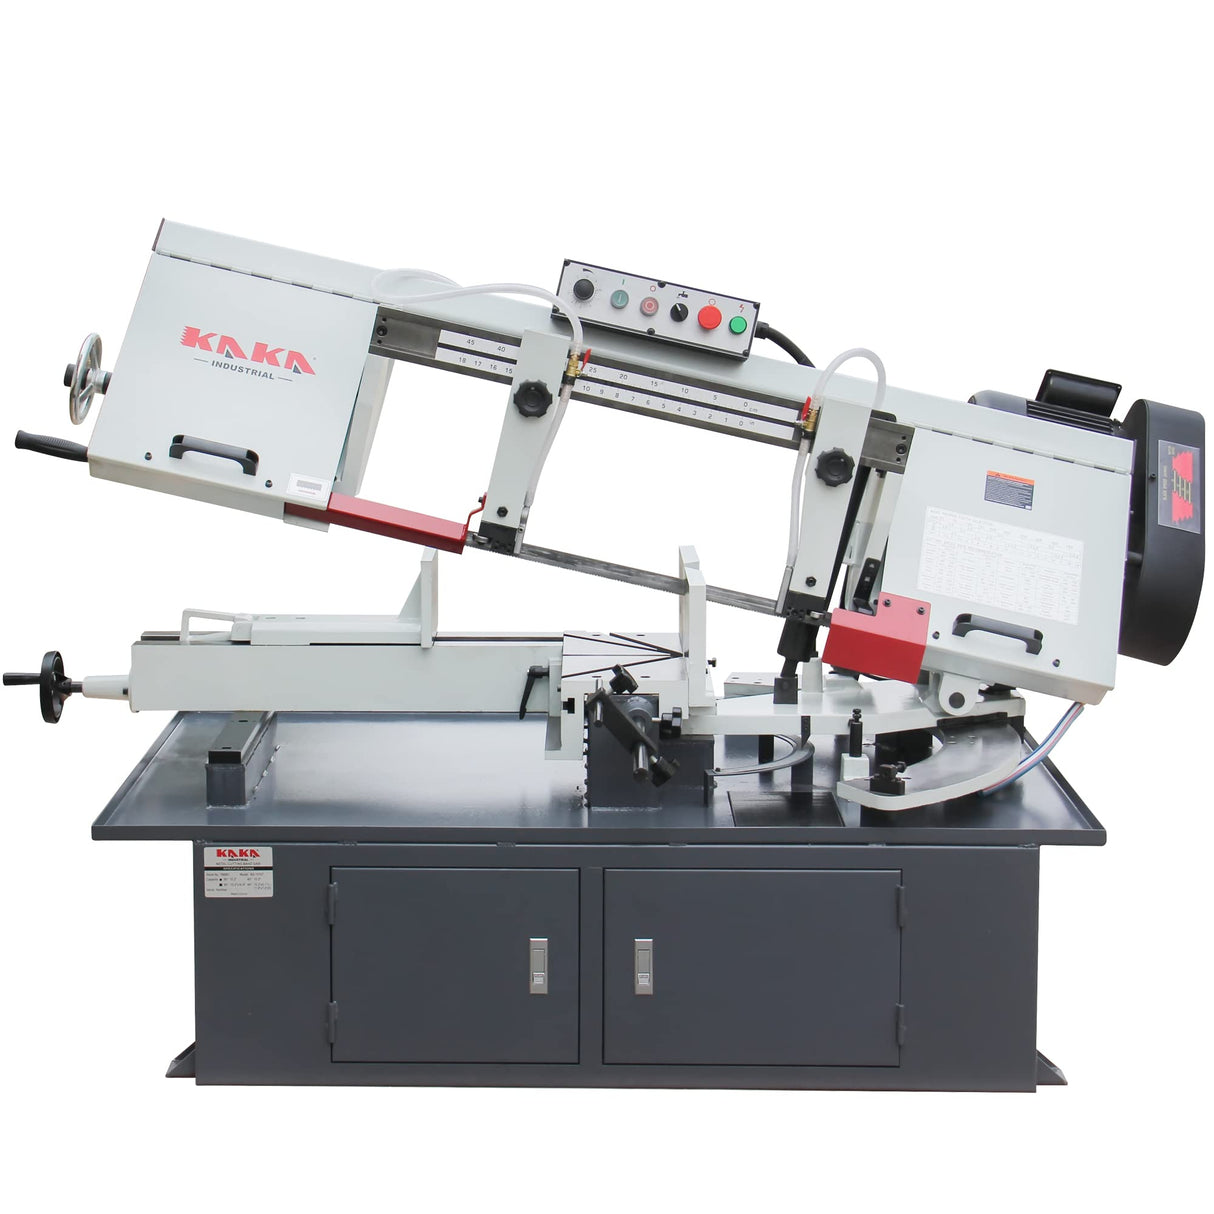 KANG INDUSTRIAL BS-1018T,  260mm Round Bar Cutting Band Saw, Dual Miter Saw Frame Cutting Bandsaw, 240V Motor